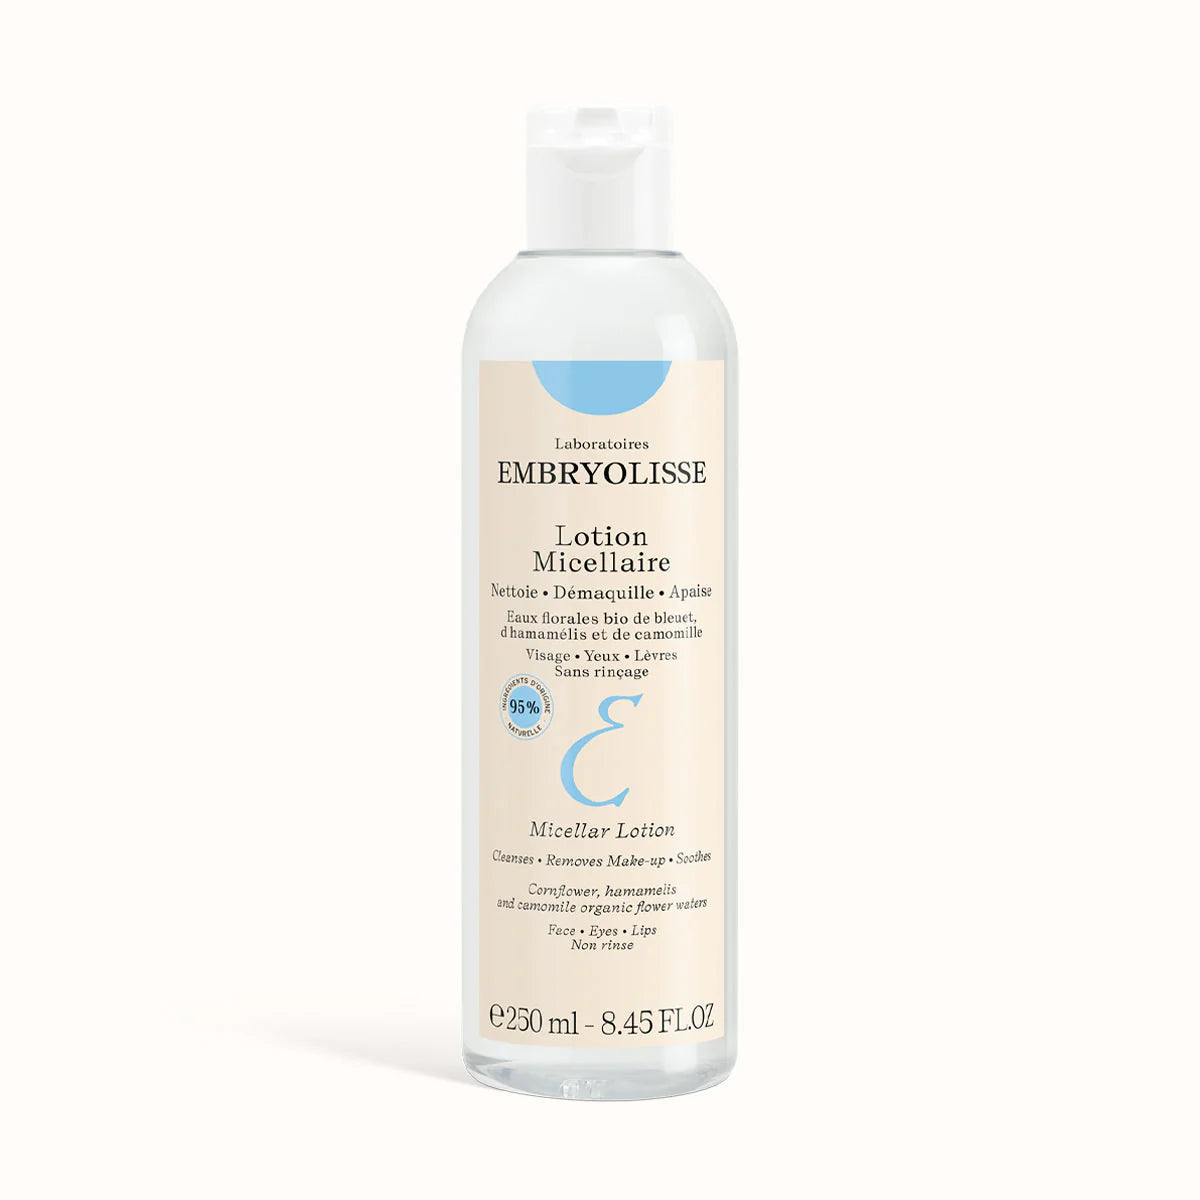 Embryolisse Lotion Micellaire makeup remover micellar water no rinse 8.45 oz